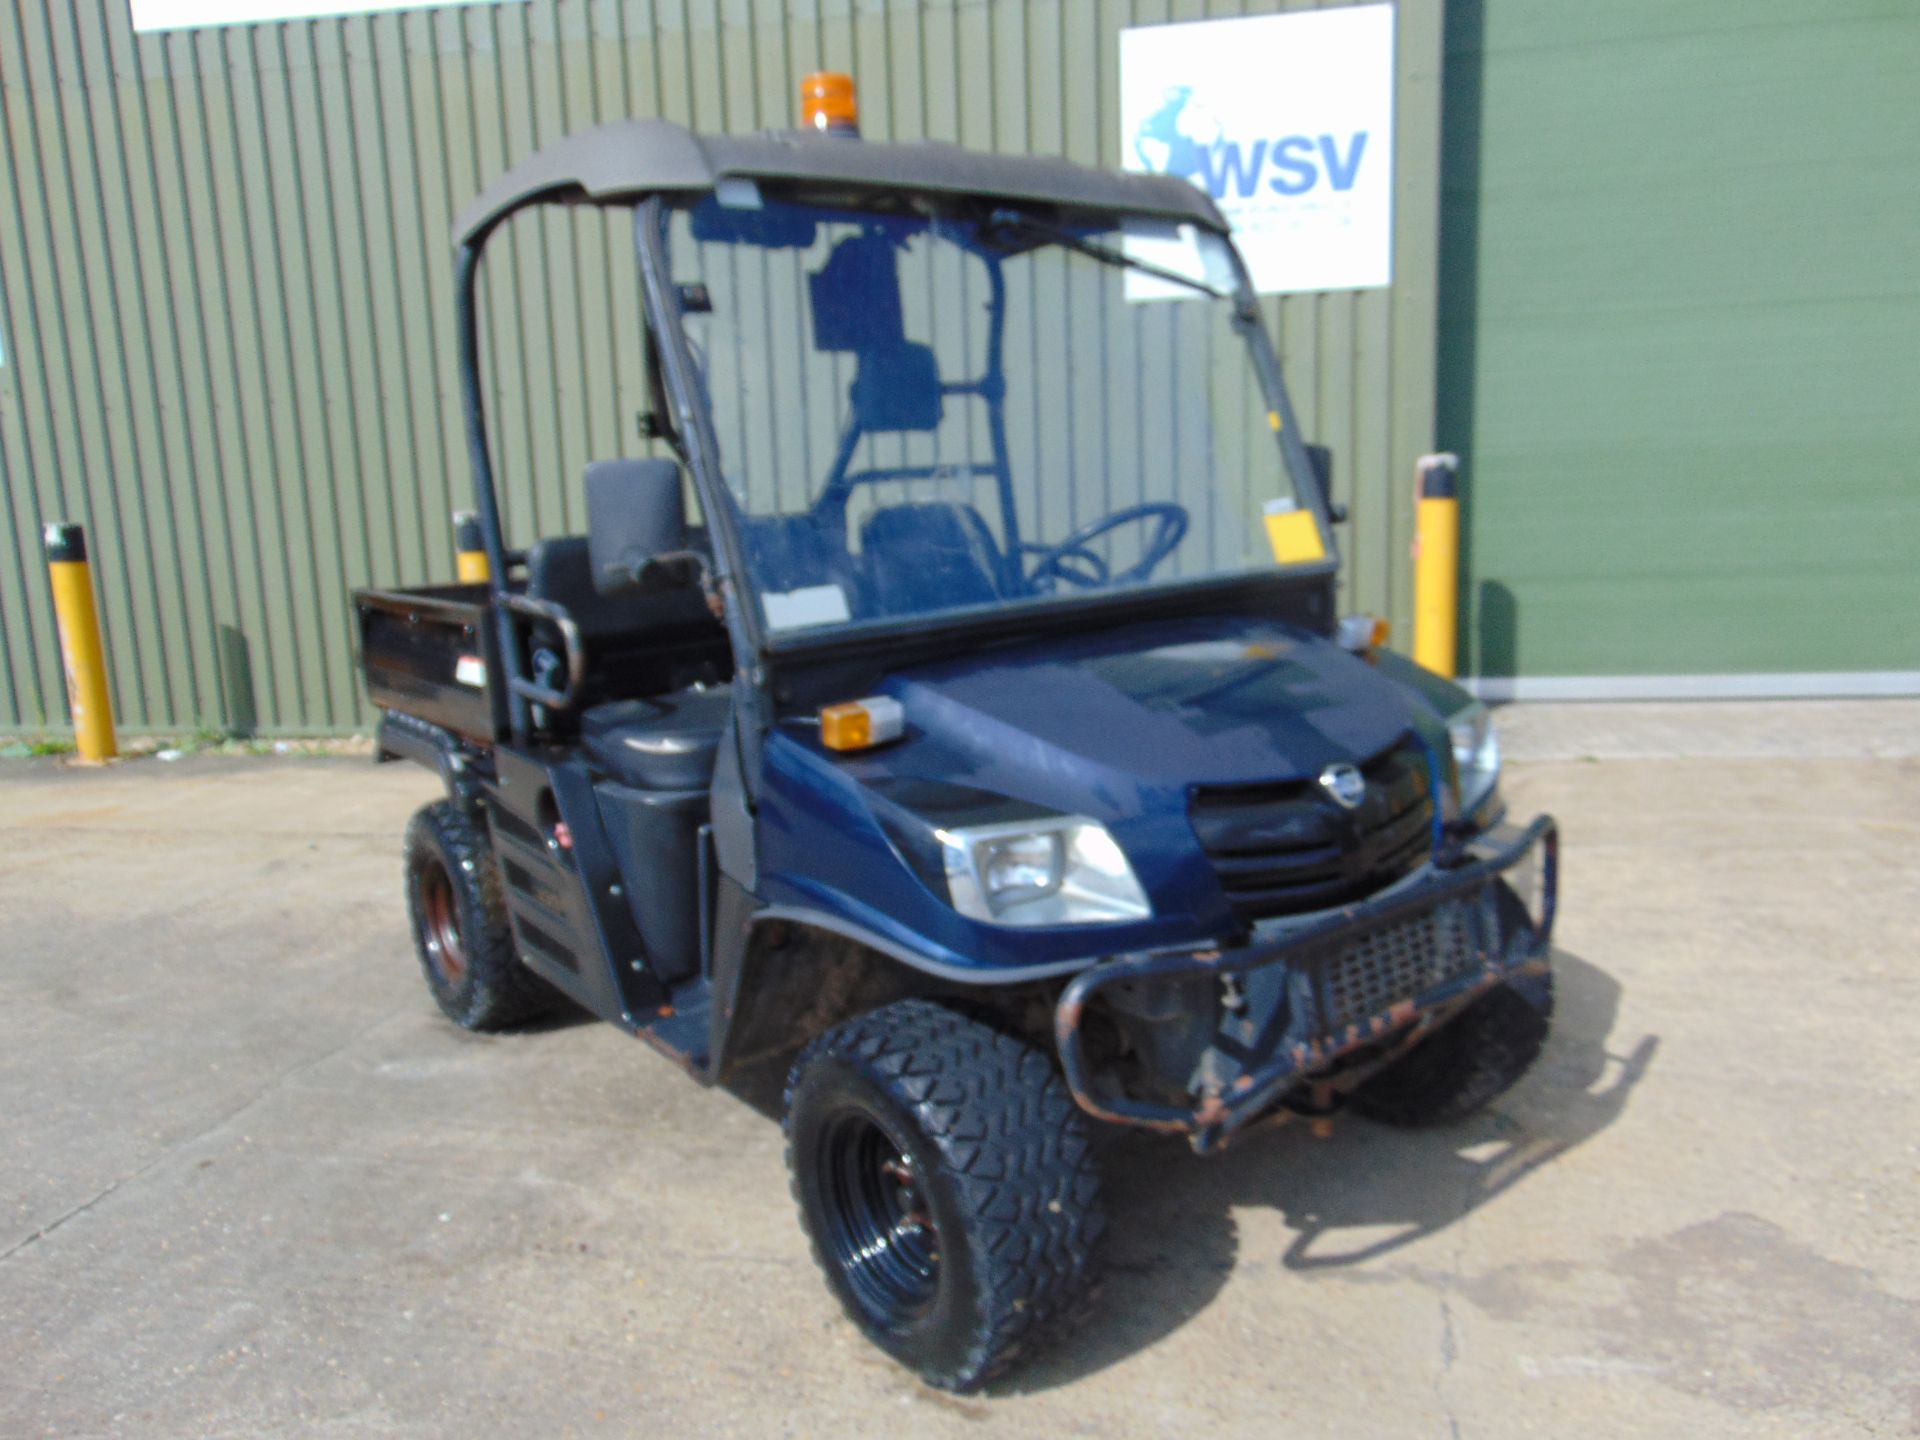 2014 Cushman XD1600 4x4 Diesel Utility Vehicle Showing 1198 hrs - Image 2 of 18